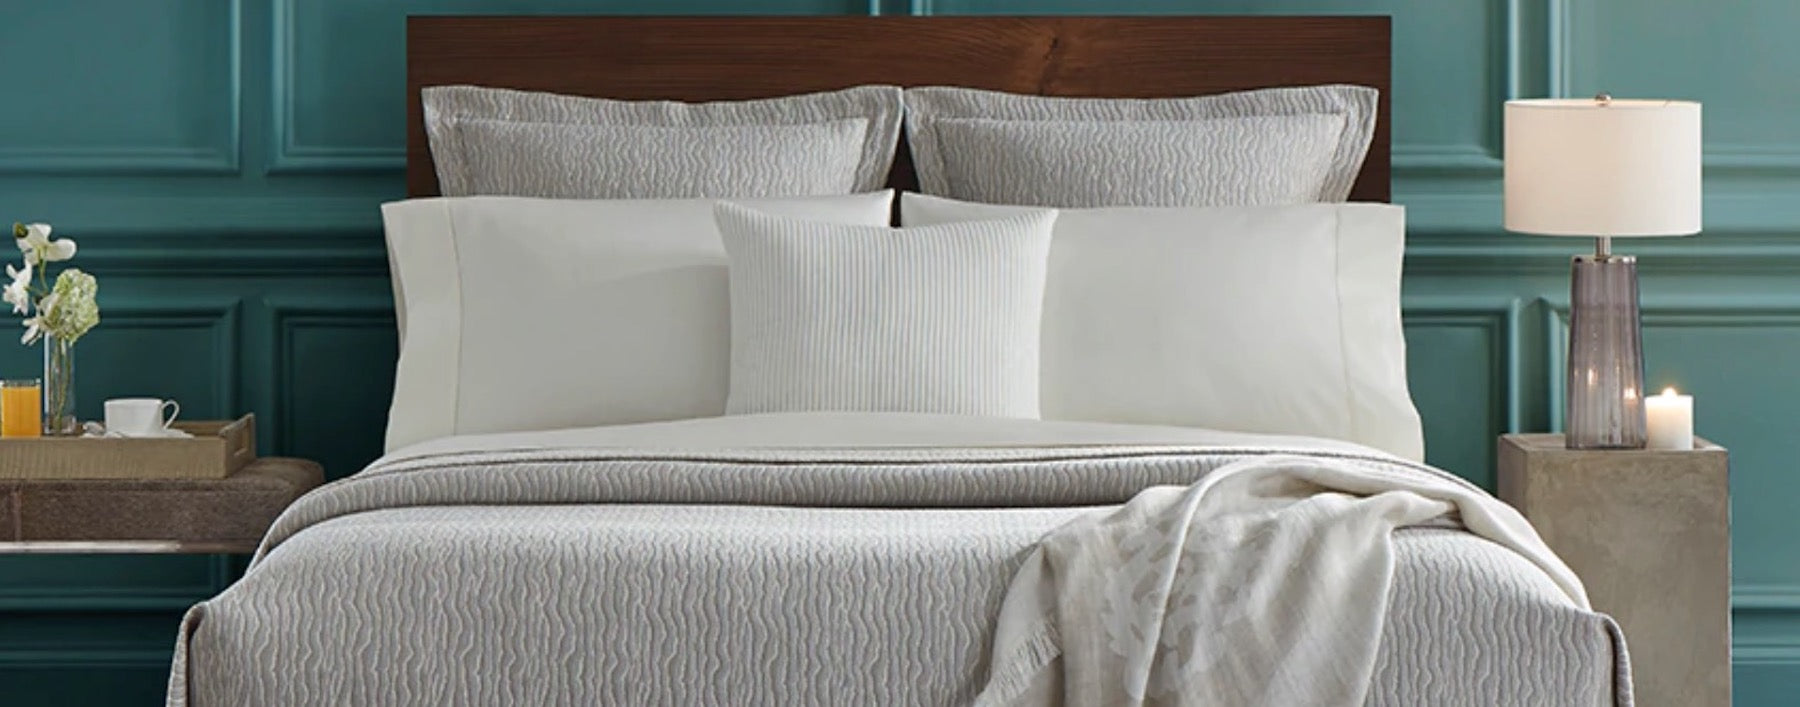 Linen Coverlet - Fine Linen Coverlets, Luxury Blanket Covers and Bed Covers at Fig Linens and Home